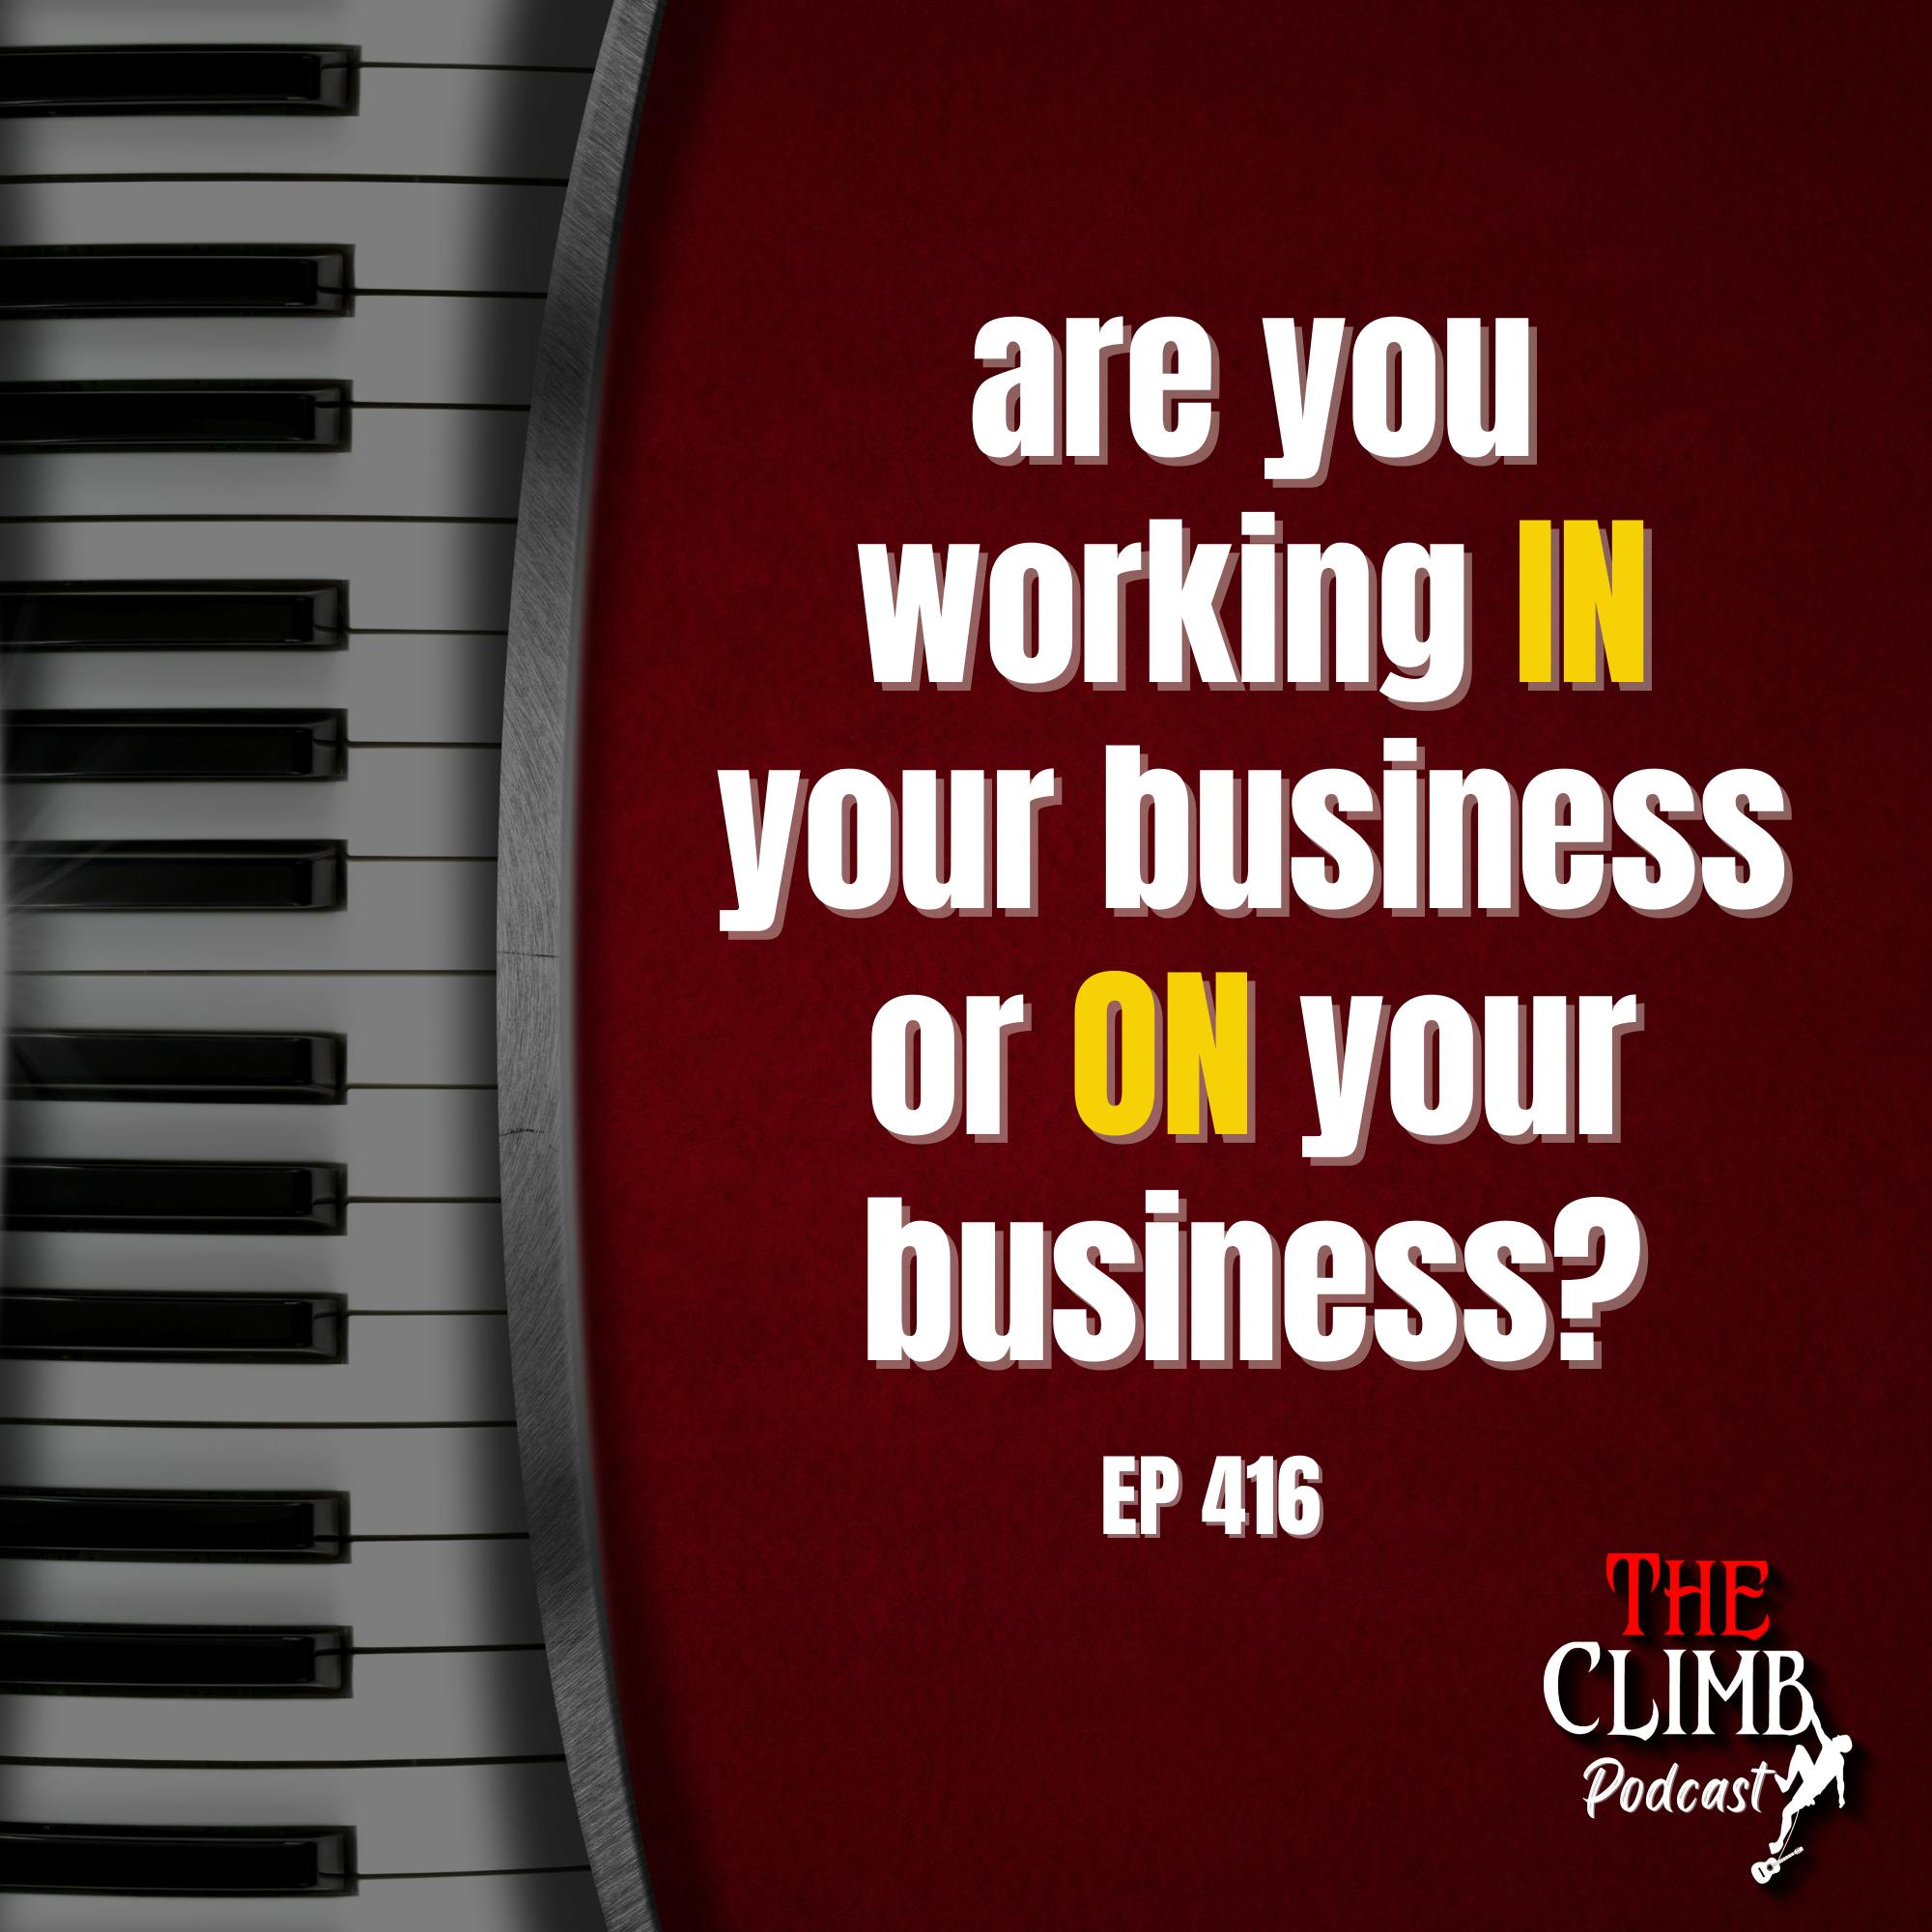 Ep 416: Are You Working IN Your Business Or ON Your Business?